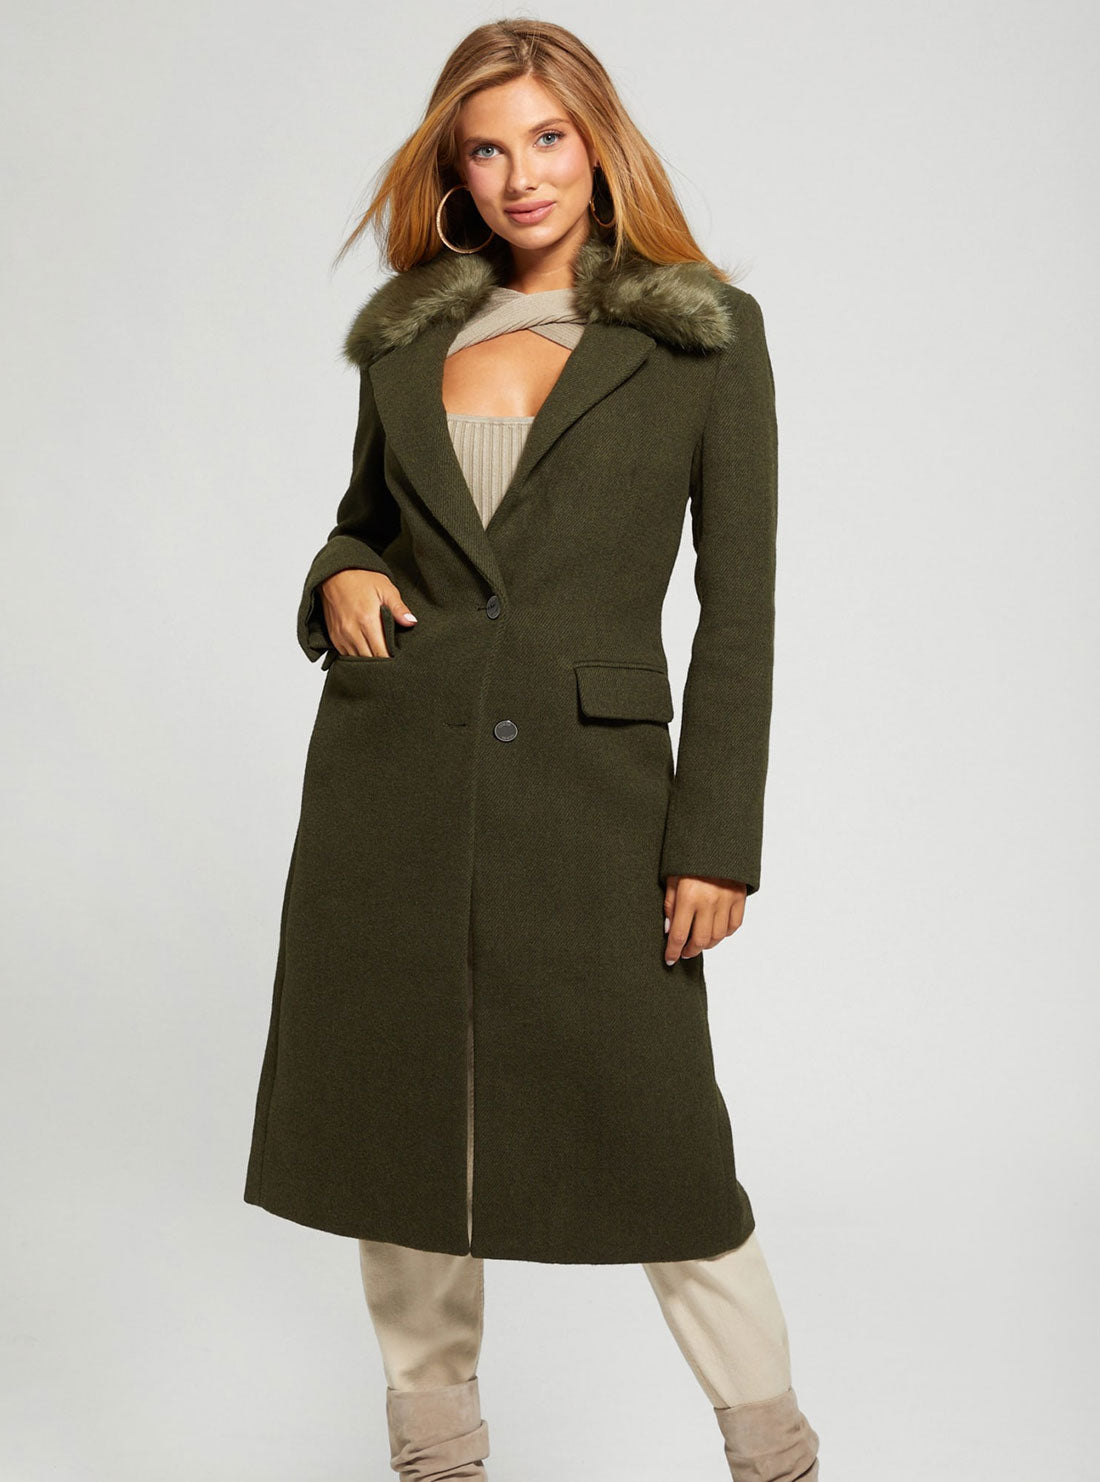 GUESS Women's Green Multi Laurence Coat W2BL53WEWY0 Front View